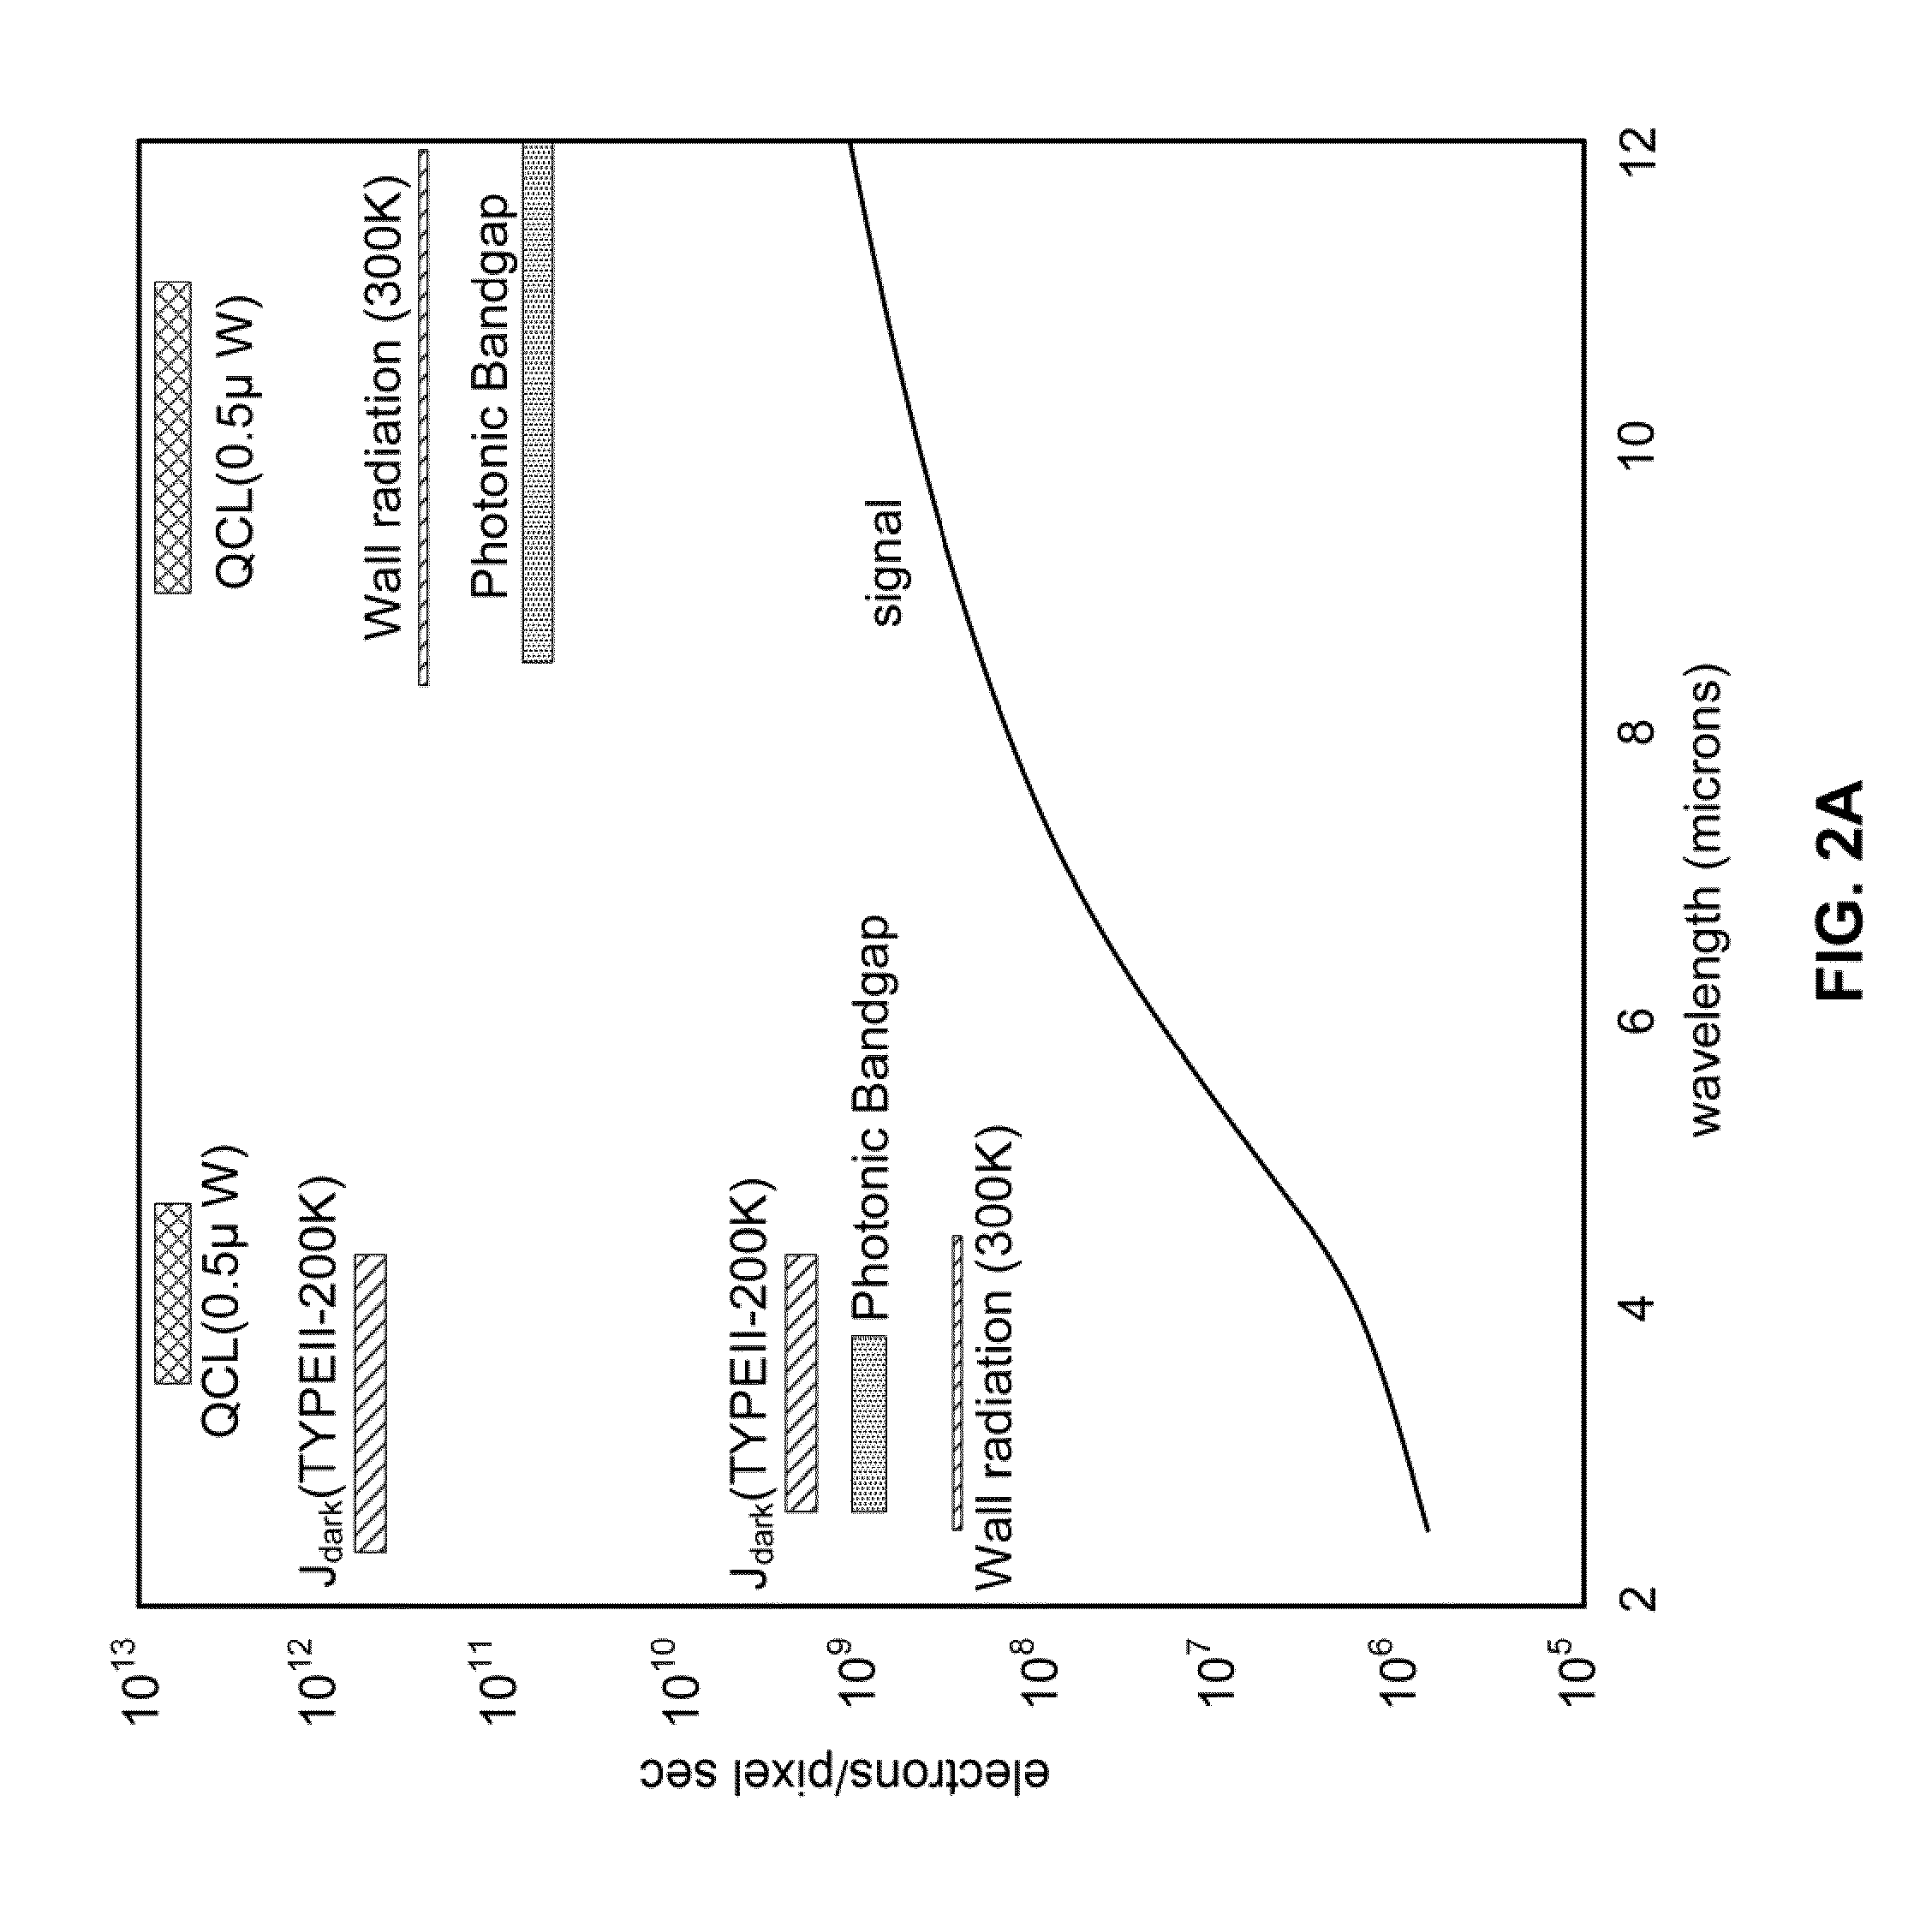 Room-temperature quantum noise limited spectrometry and methods of the same